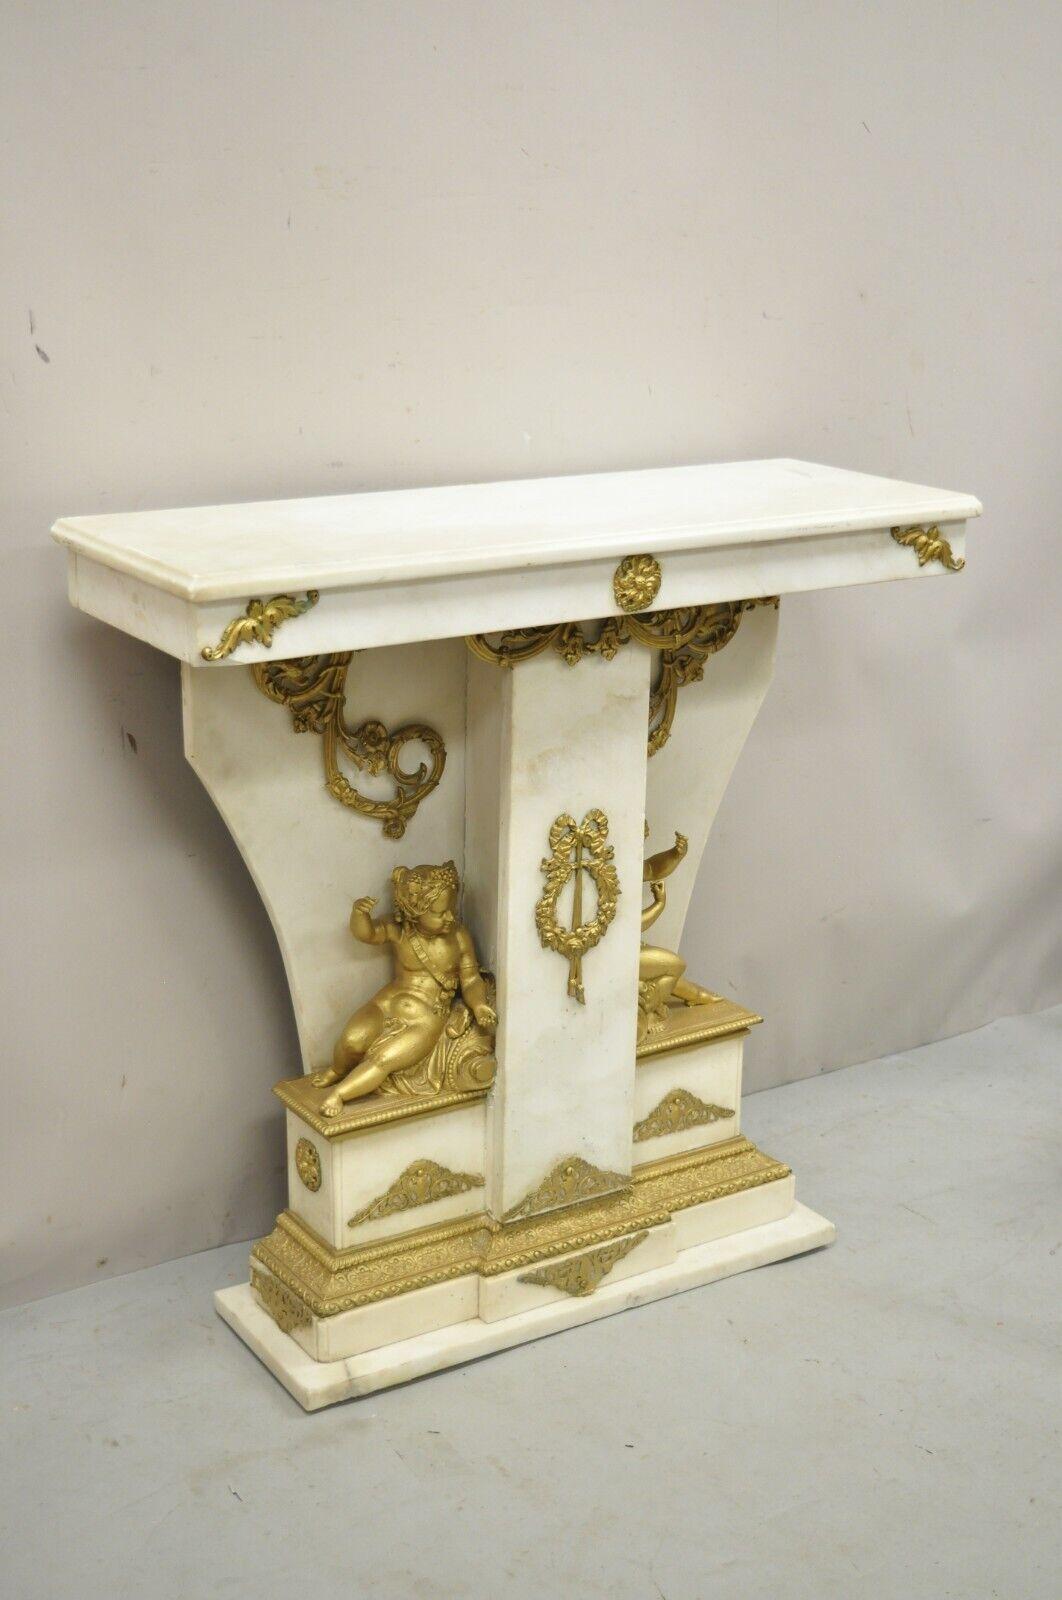 French Louis XV style marble and bronze ormolu console table with Cherubs. Item features 2 full figured cherubs, ornate bronze ormolu throughout, marble construction, very nice antique item, quality French craftsmanship, great style and form. Circa